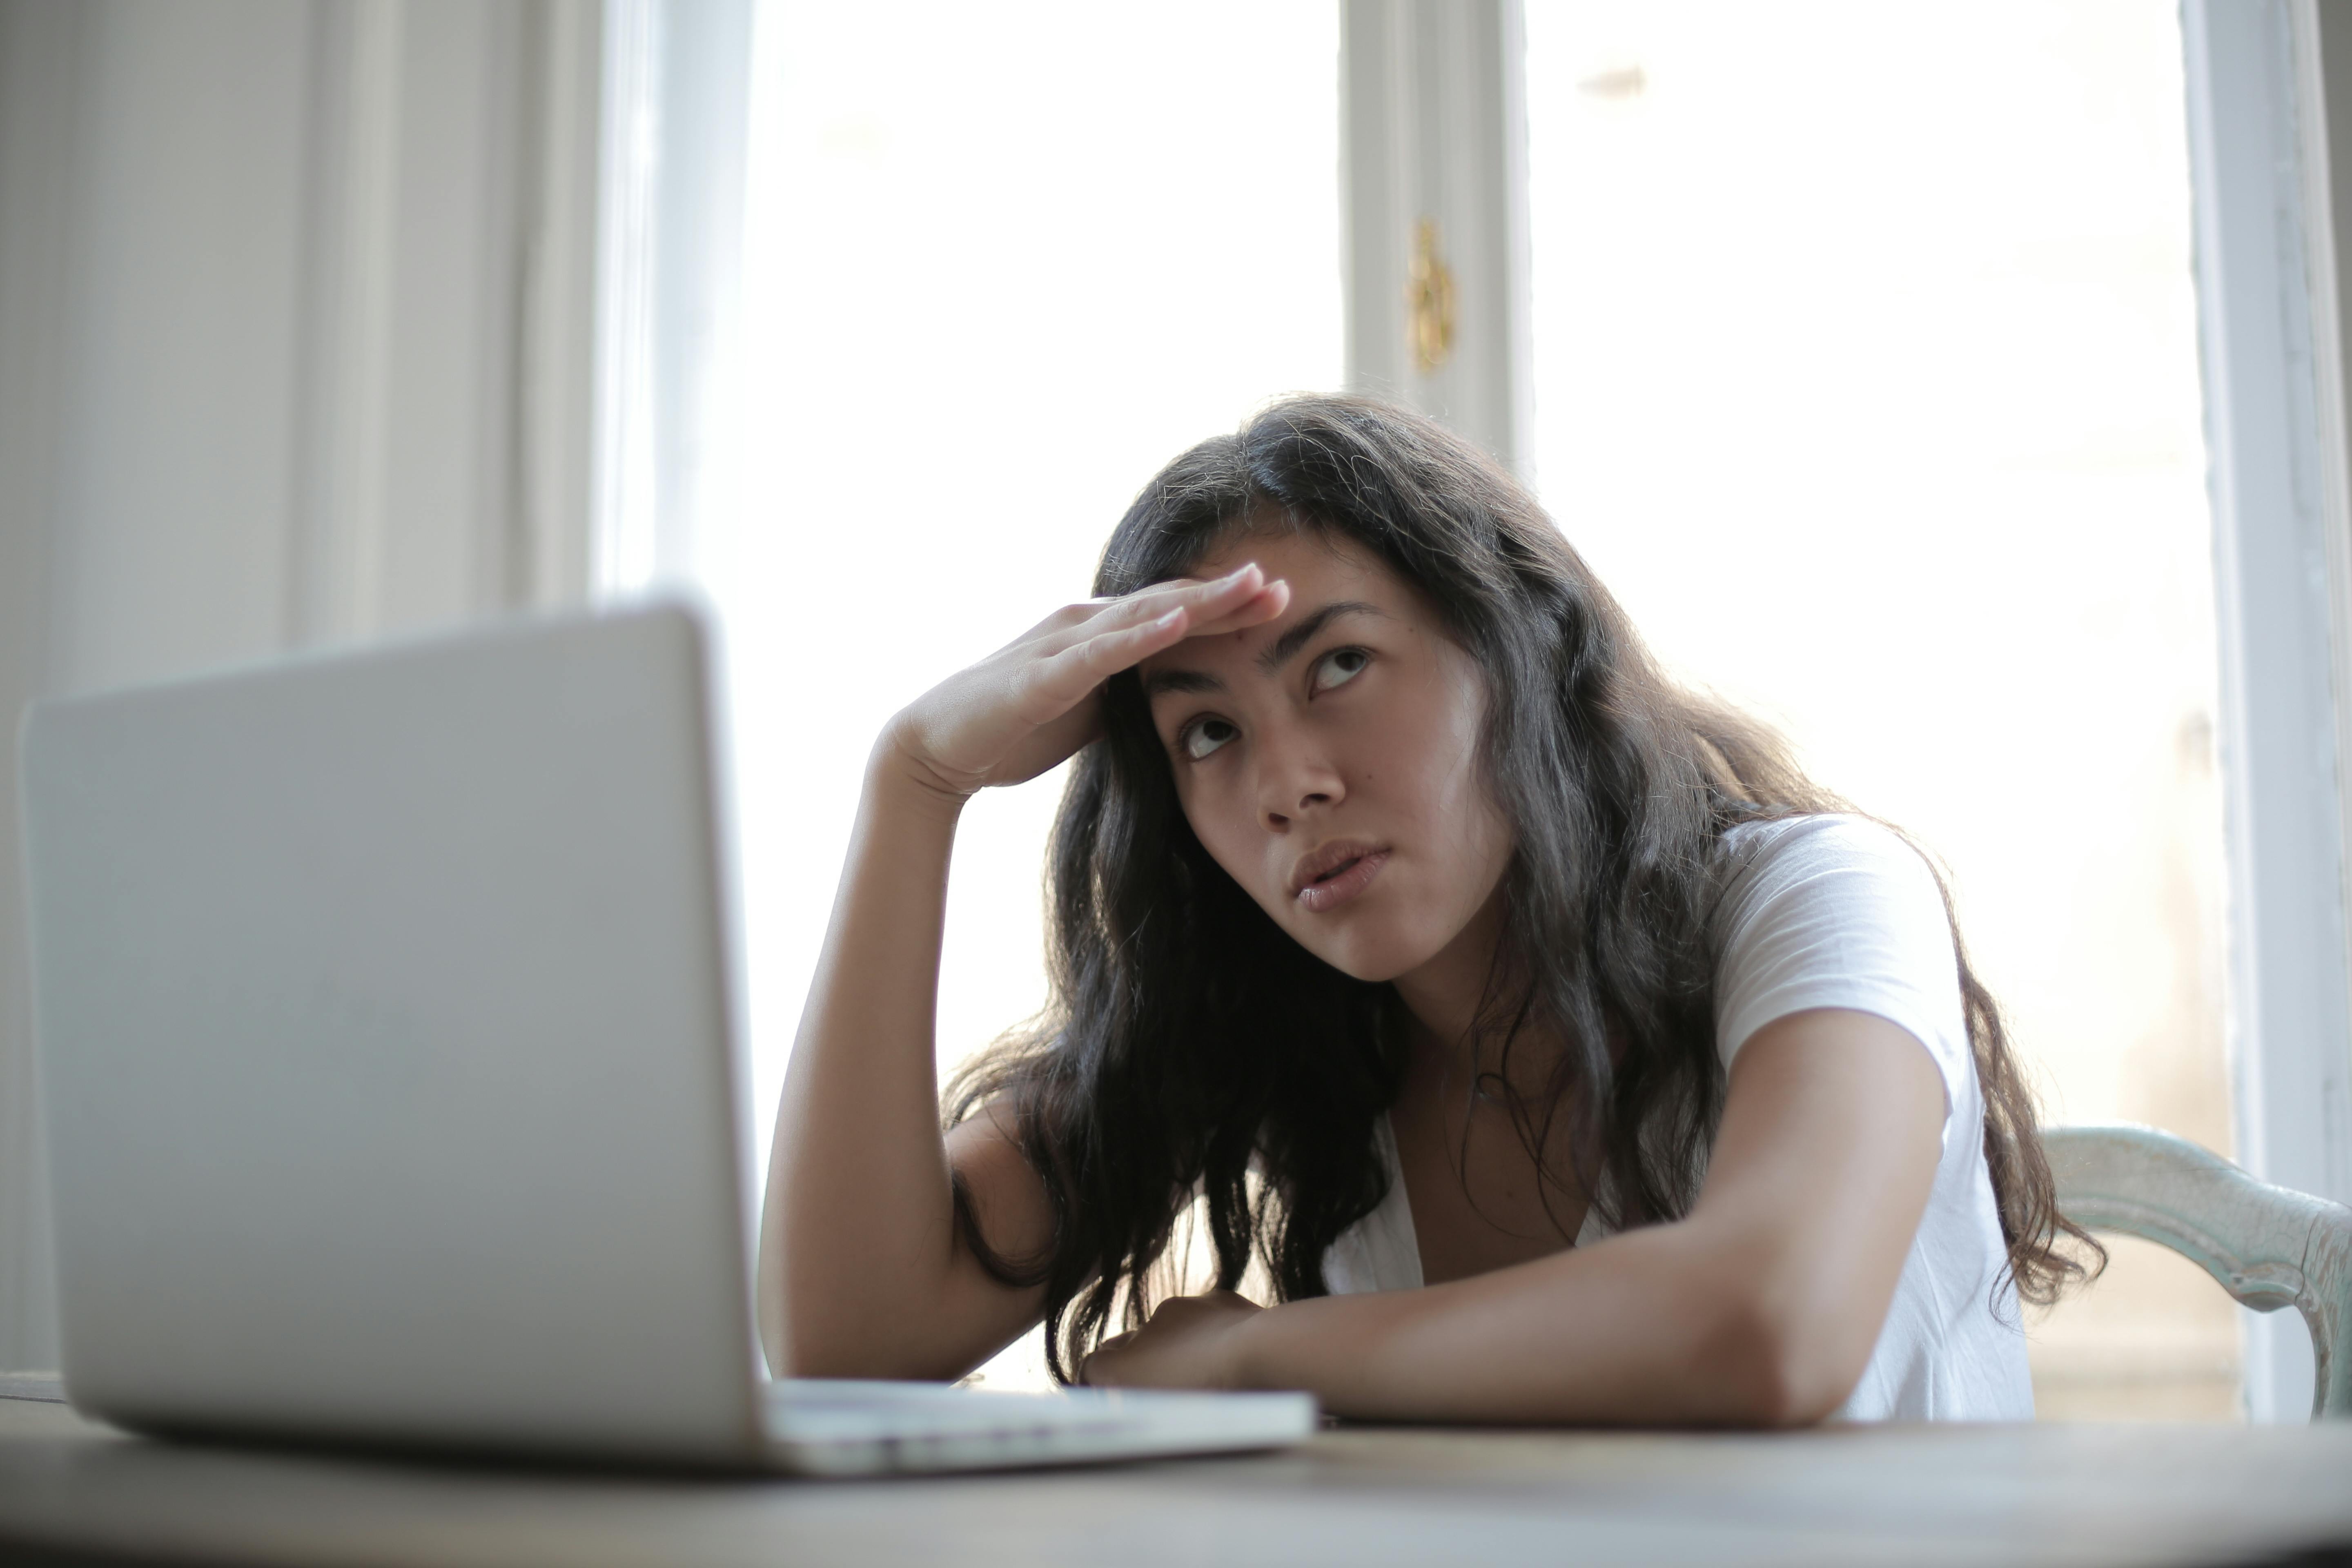 A woman sitting in front of a computer contemplating something | Source: Pexels